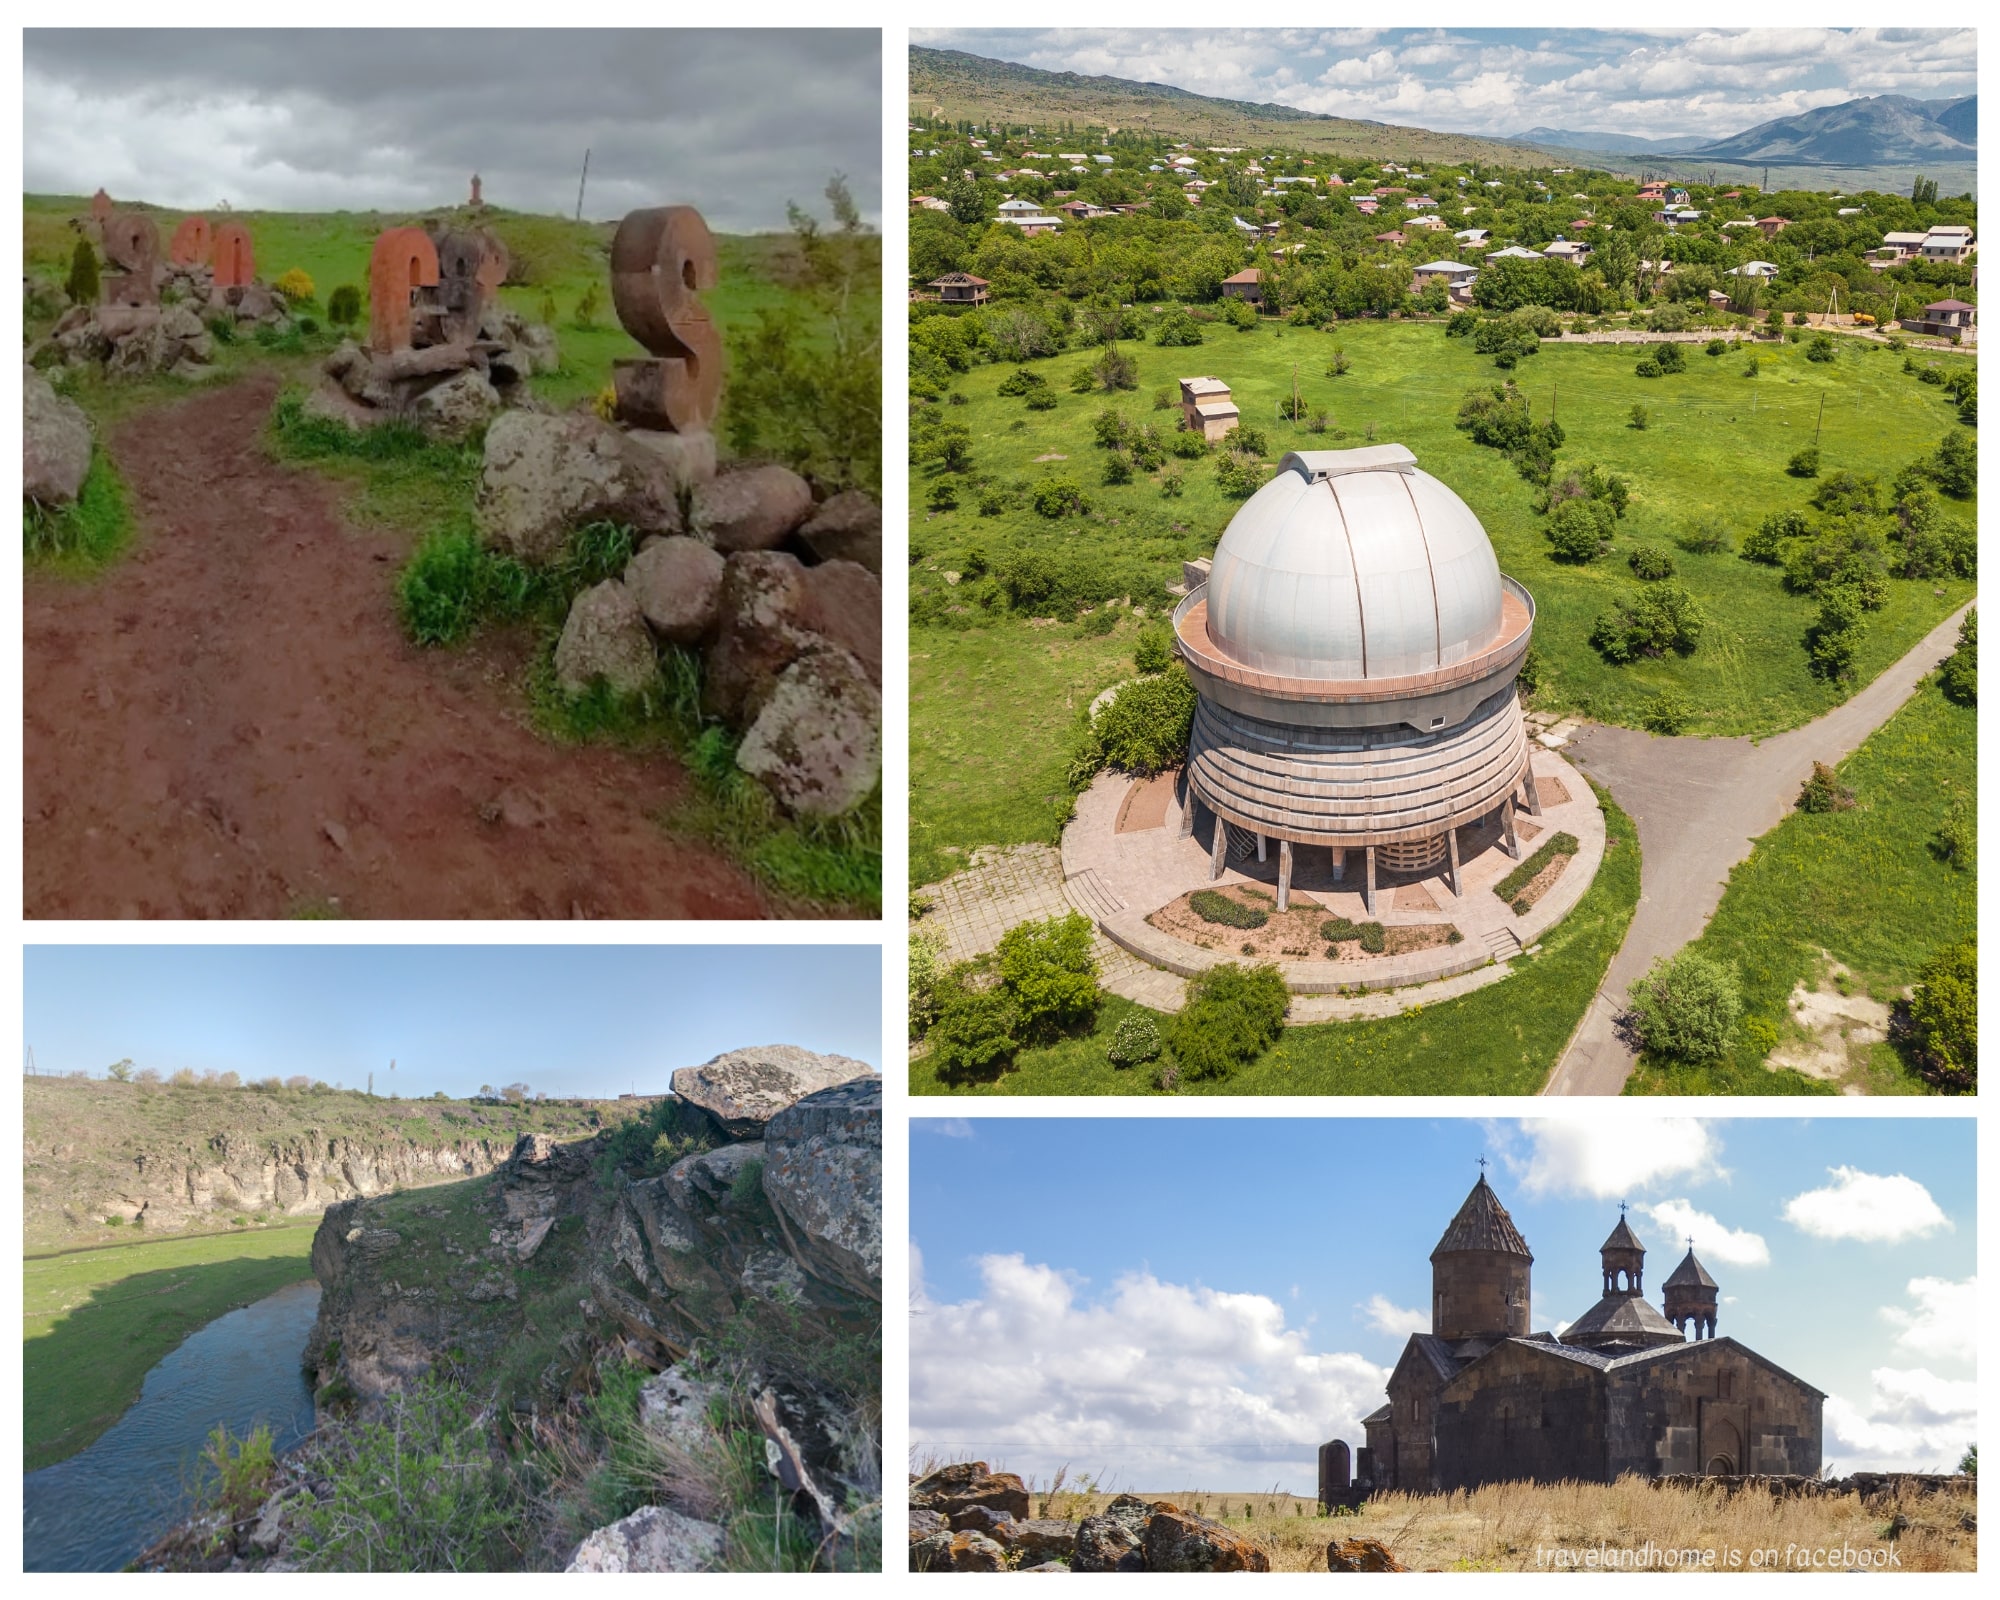 Saghmosavank Monastery, Kassakh River Canyon, Aremian Alphabet, Byurakan Astronomical Observatory, top attractions in Armenia min